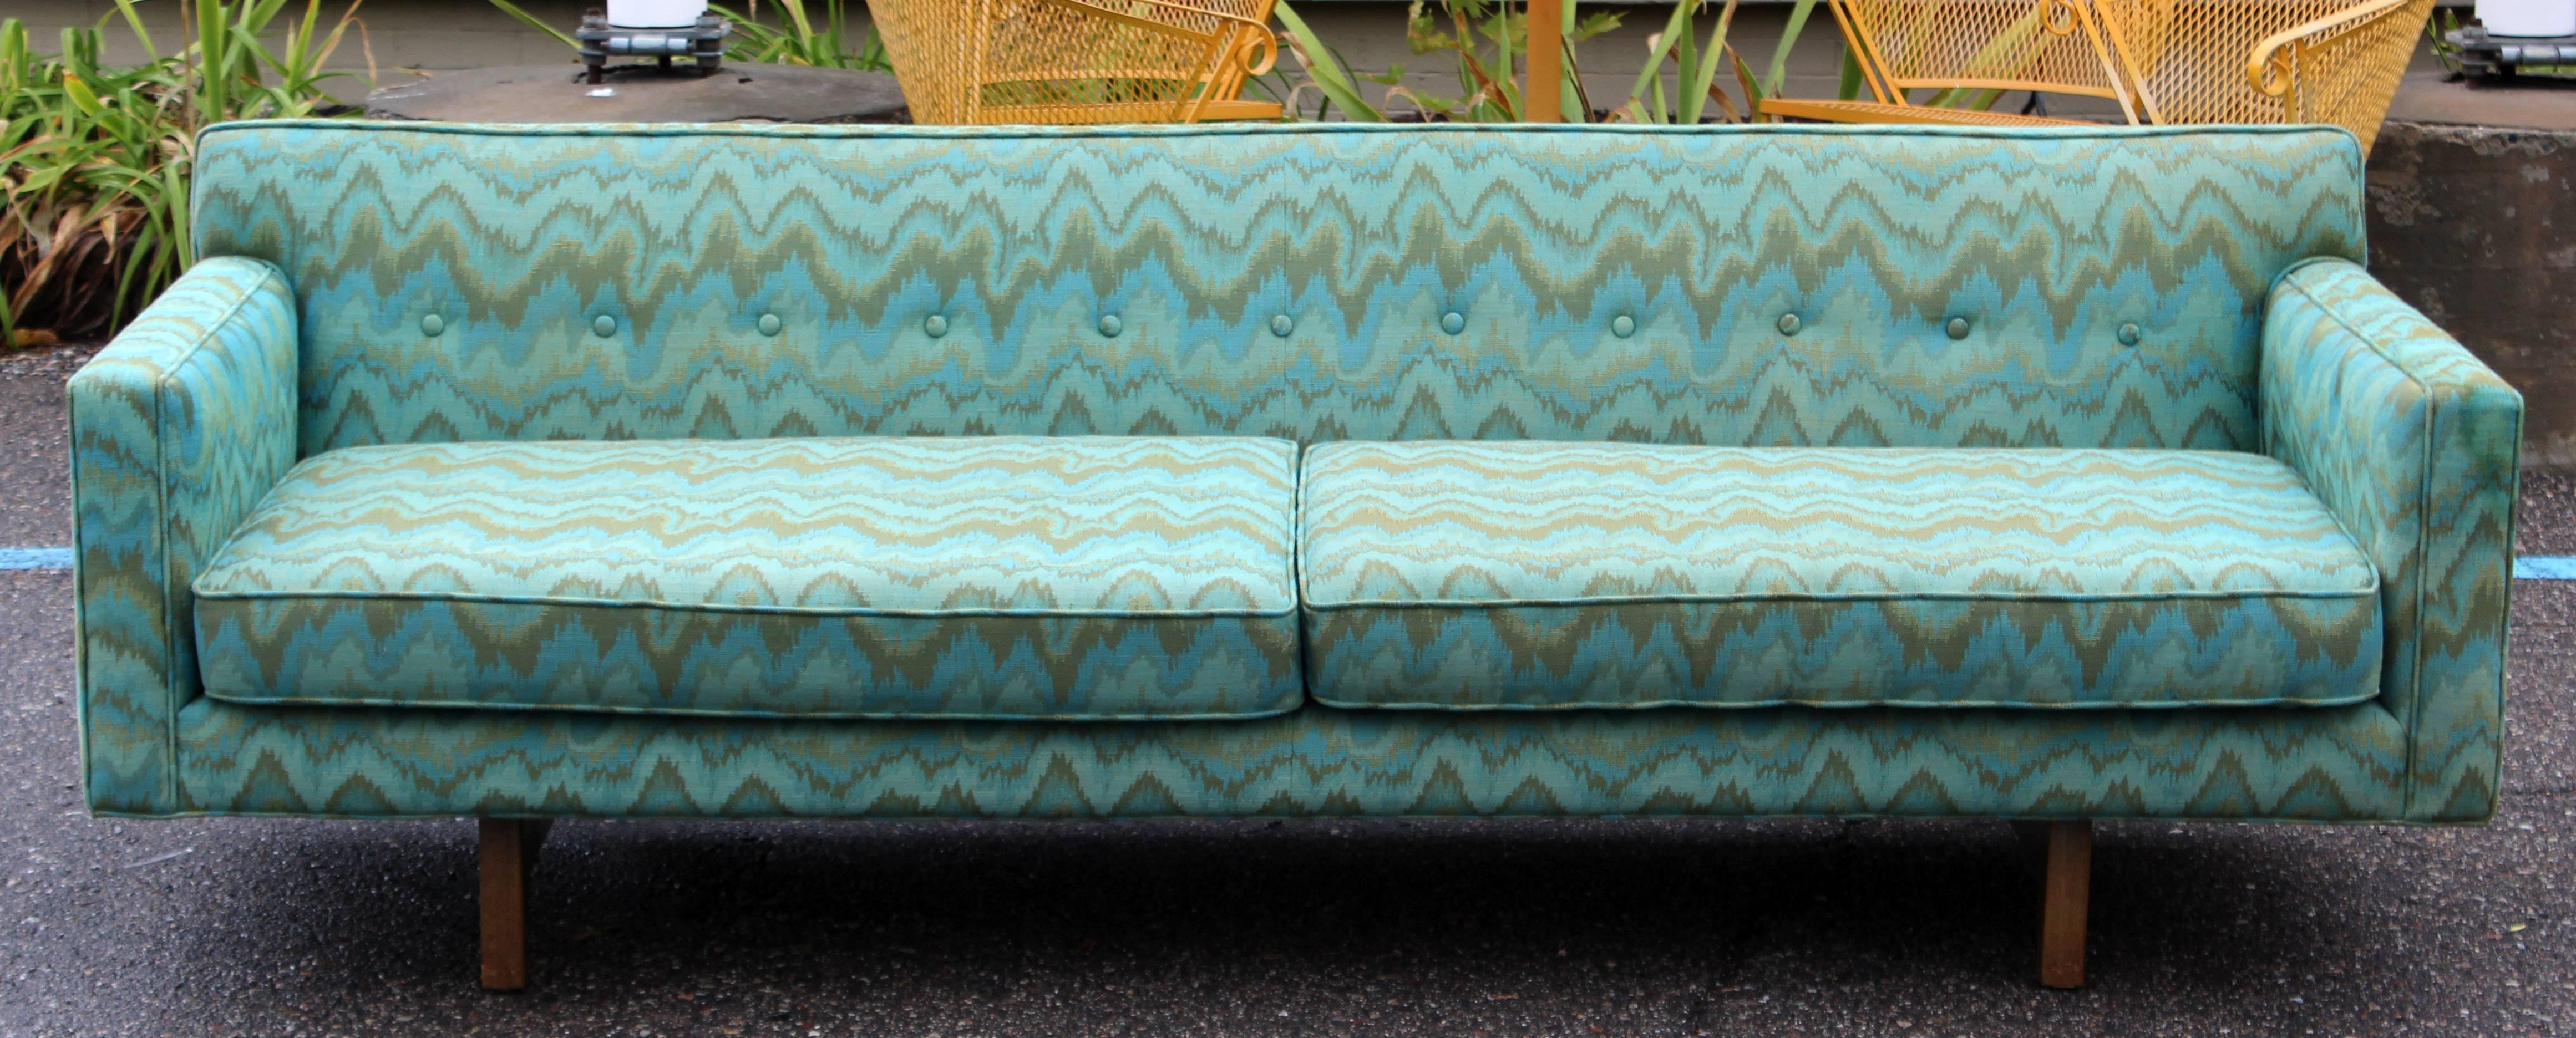 For your consideration is a truly magnificent, bracket sofa, designed by Edward Wormley for Dunbar and bearing a stitched tag, circa 1950s. In excellent condition. The dimensions are 84